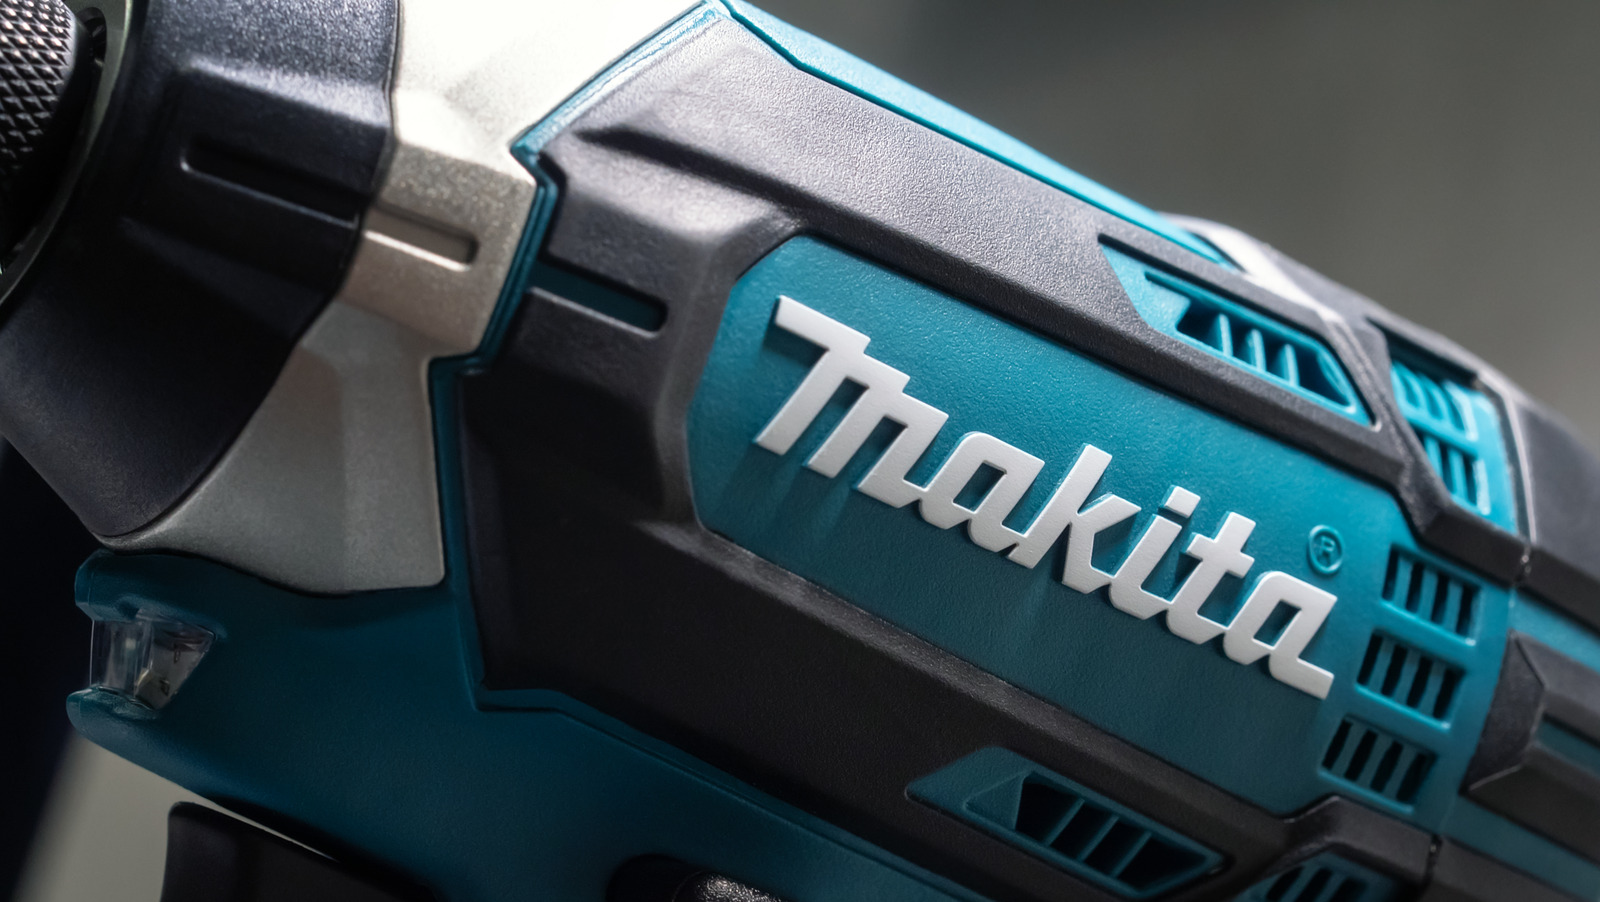 6 Of The Best Cordless Makita Impact Drivers Available (According To User Reviews)